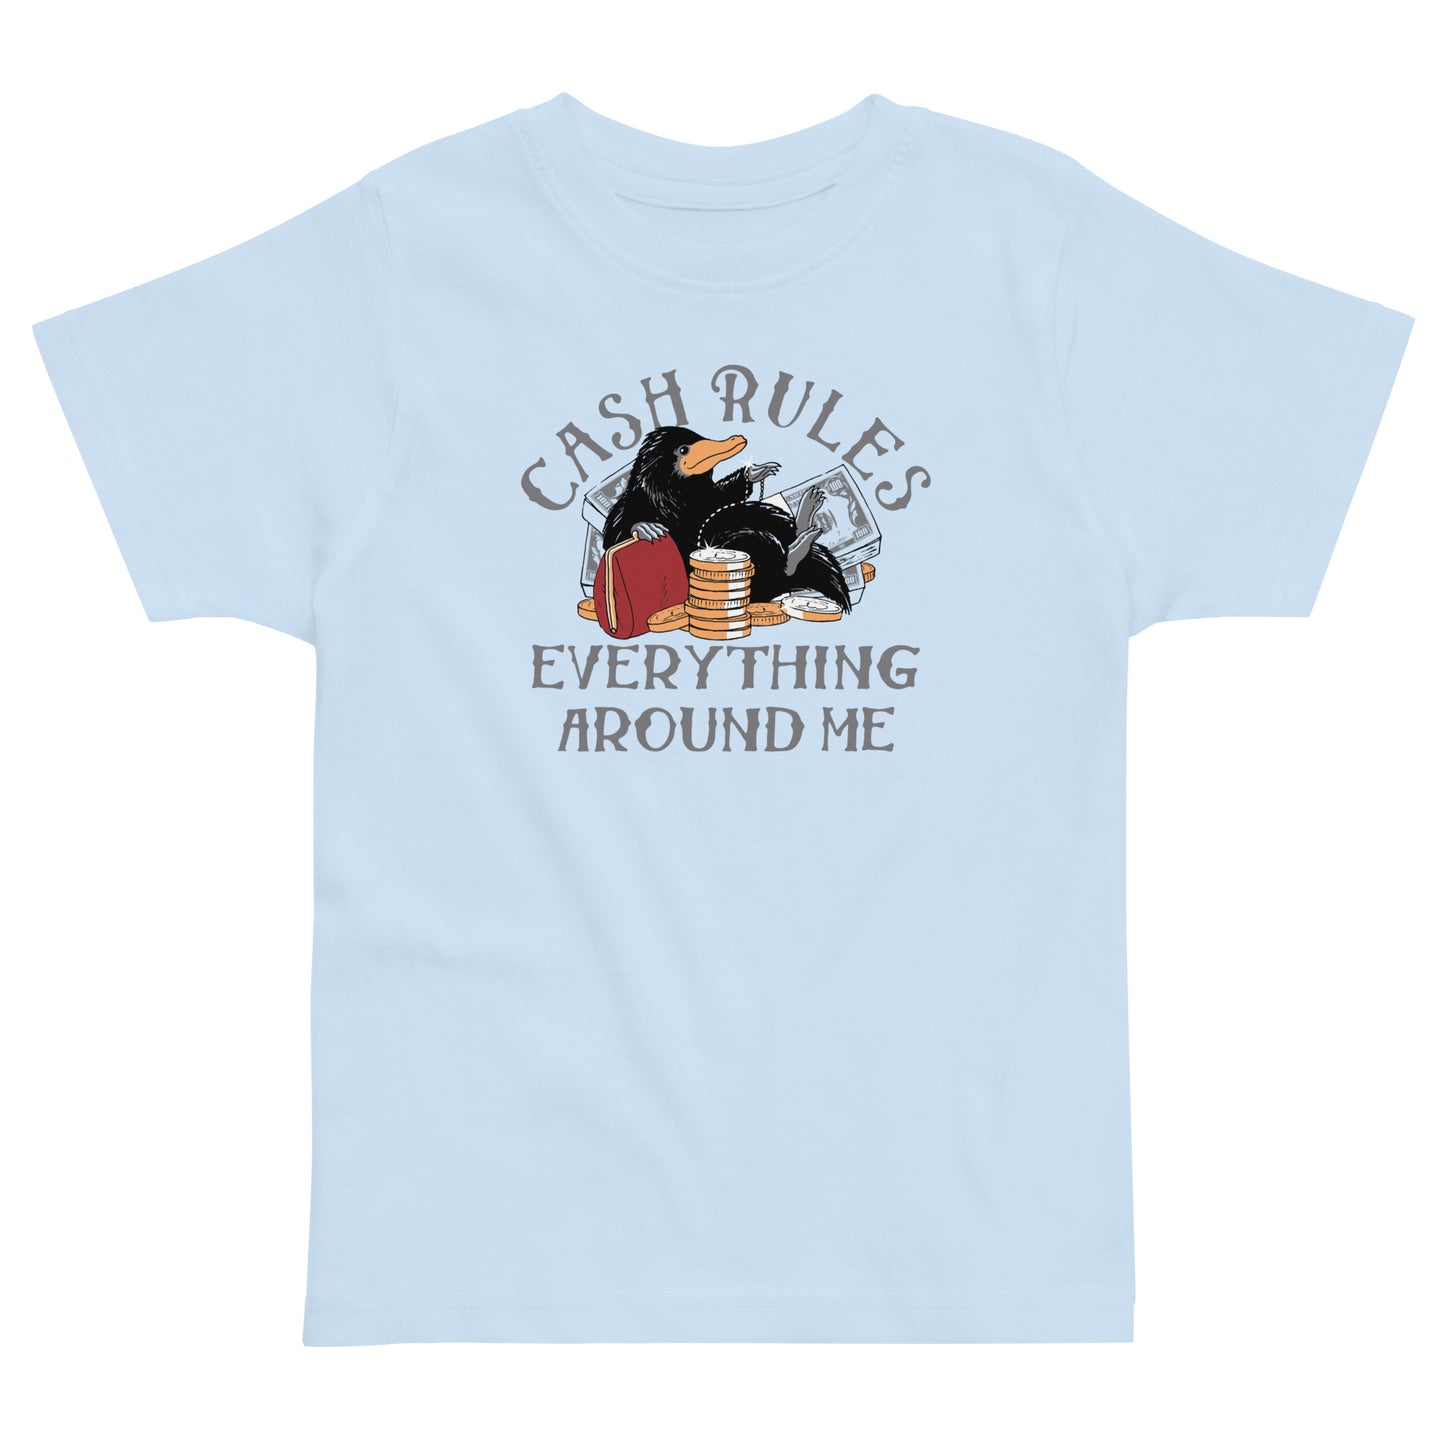 Cash Rules Everything Around Me Kid's Toddler Tee